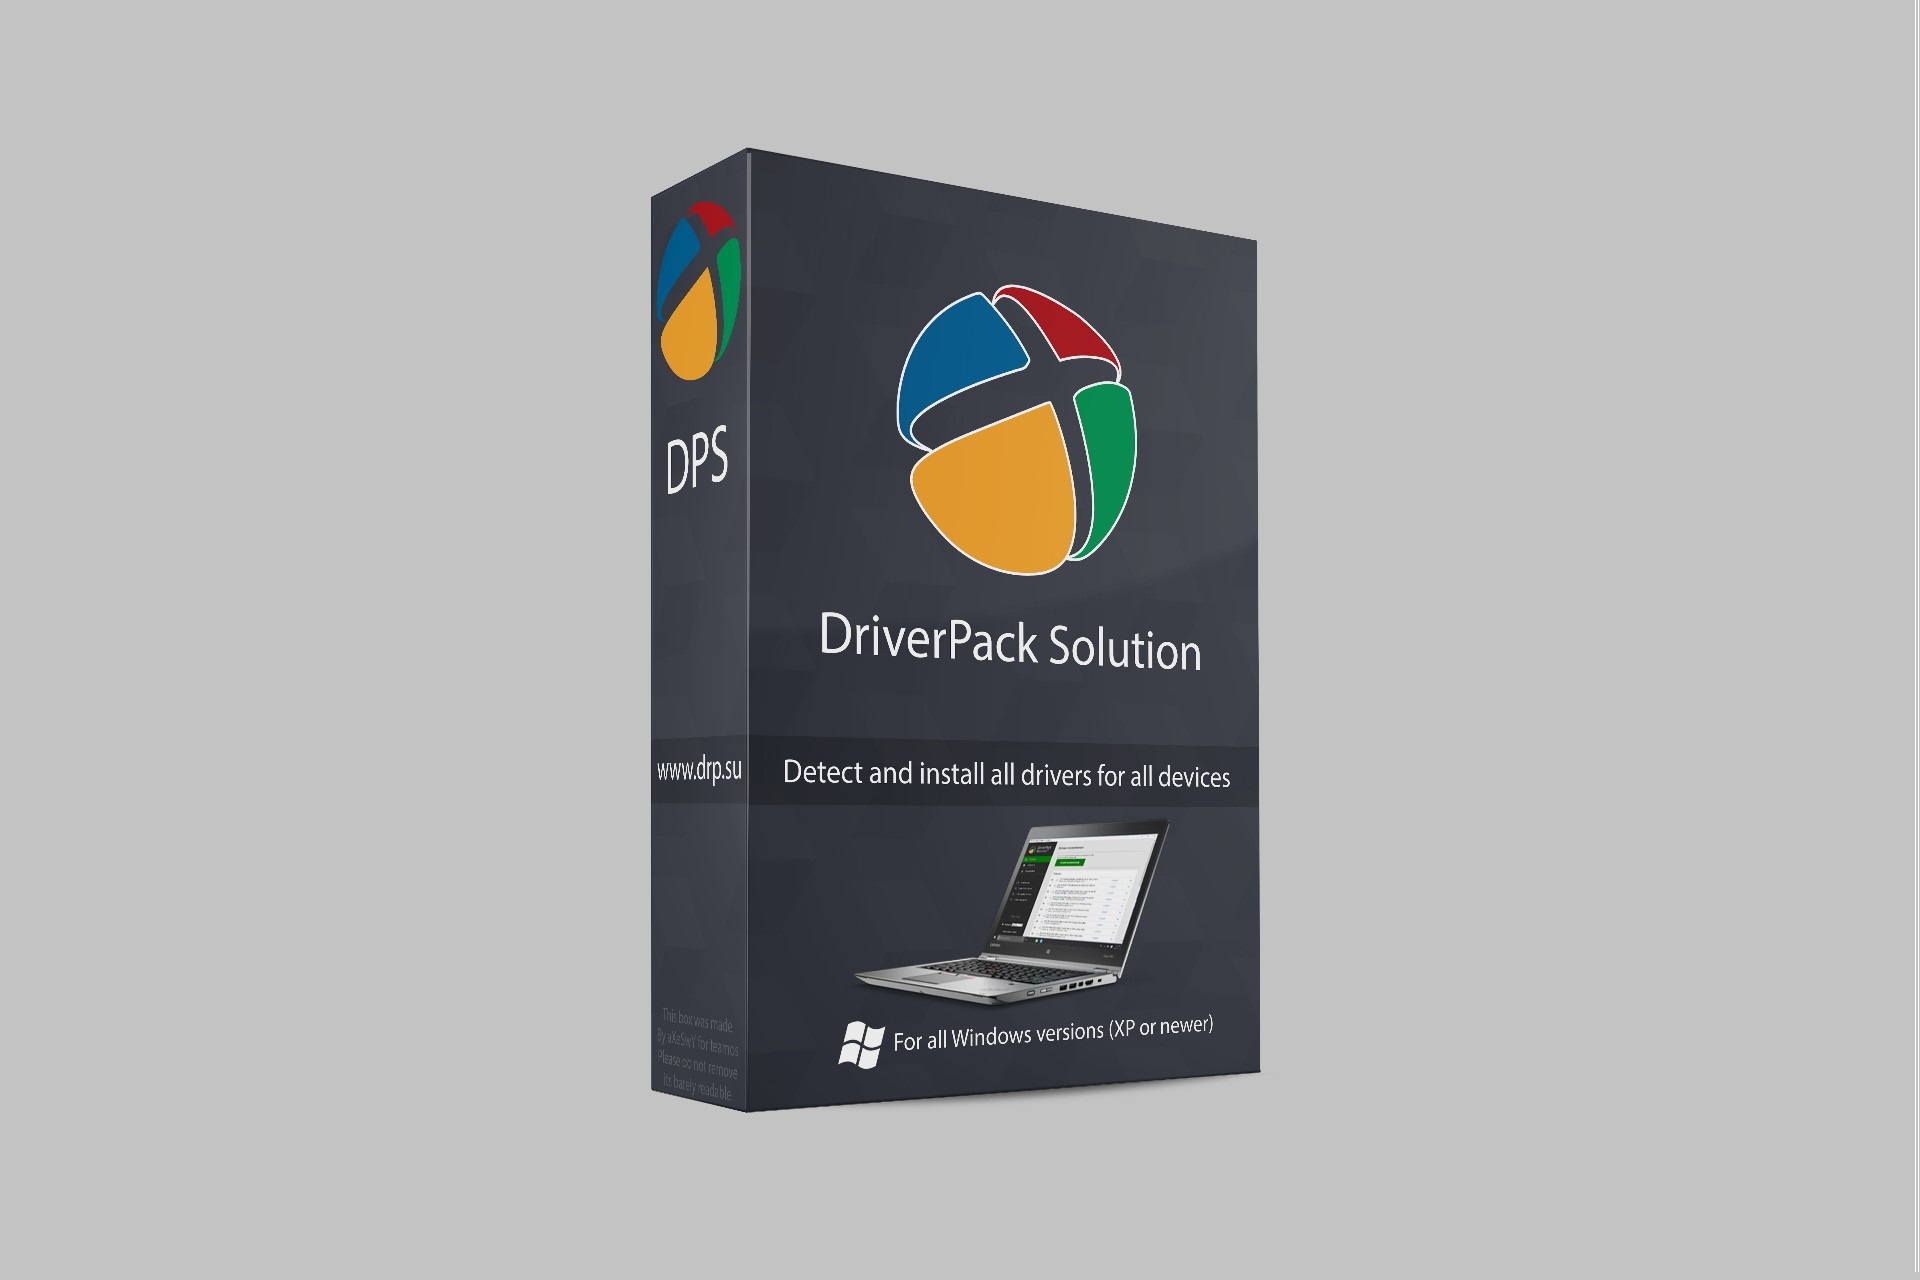 Driverpack solution 17.3.1 download